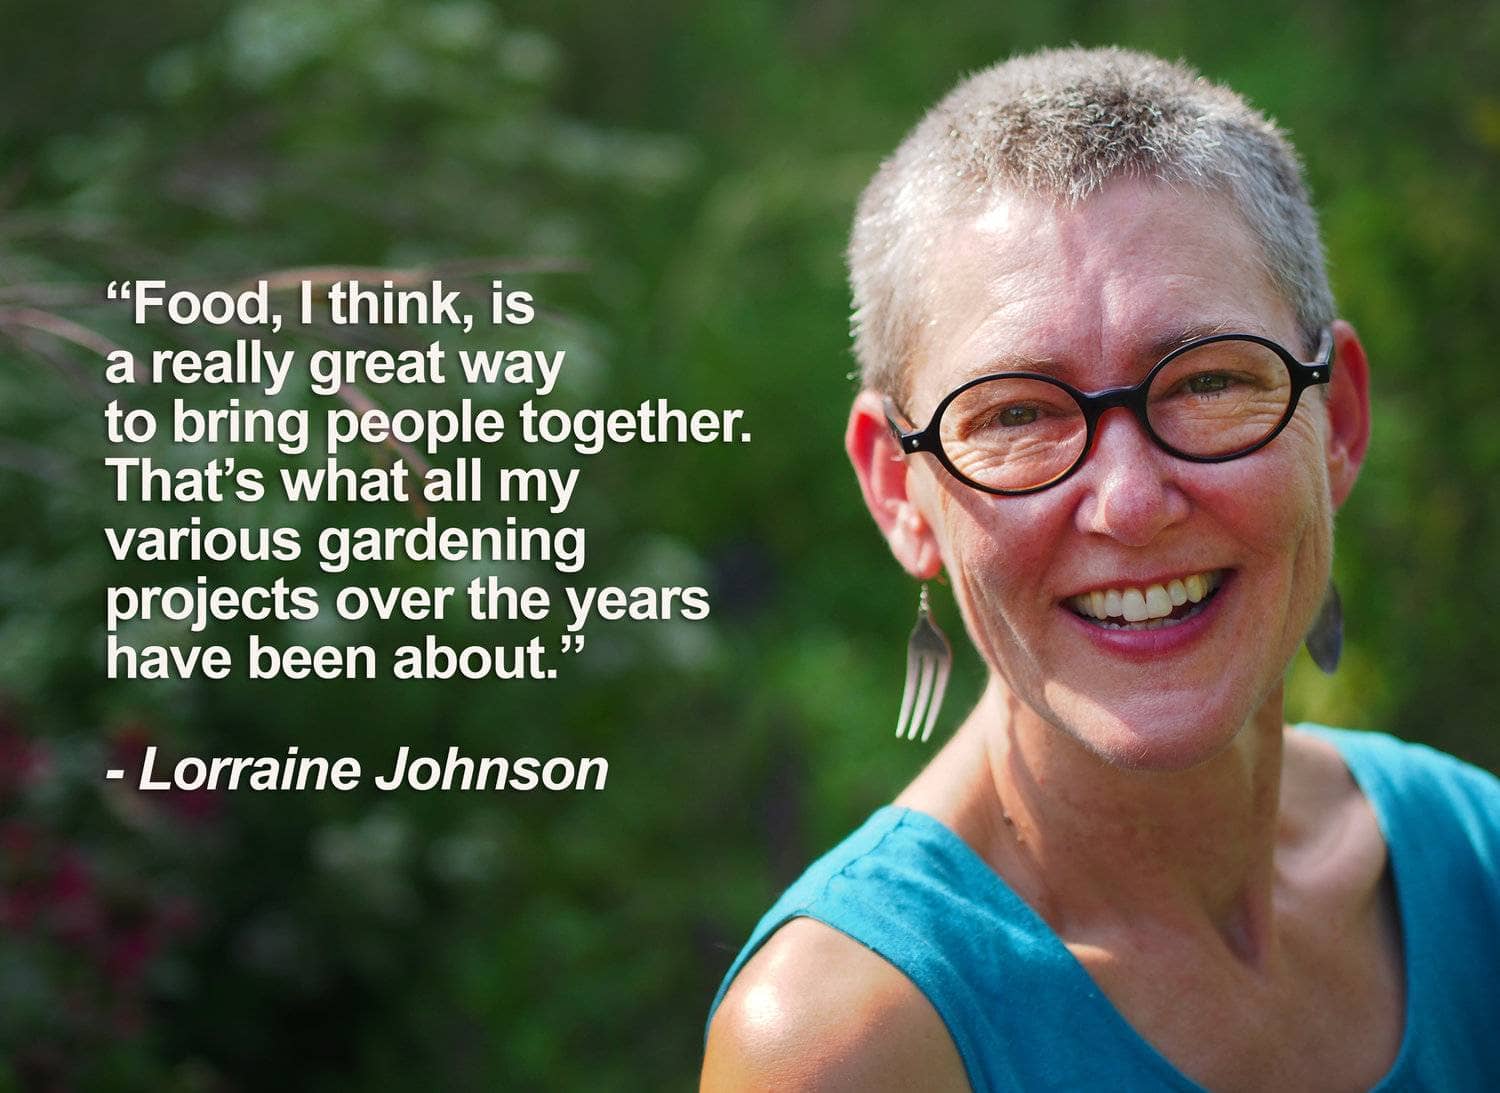 Connecting – Lorraine Johnson and the Reason for Gardens